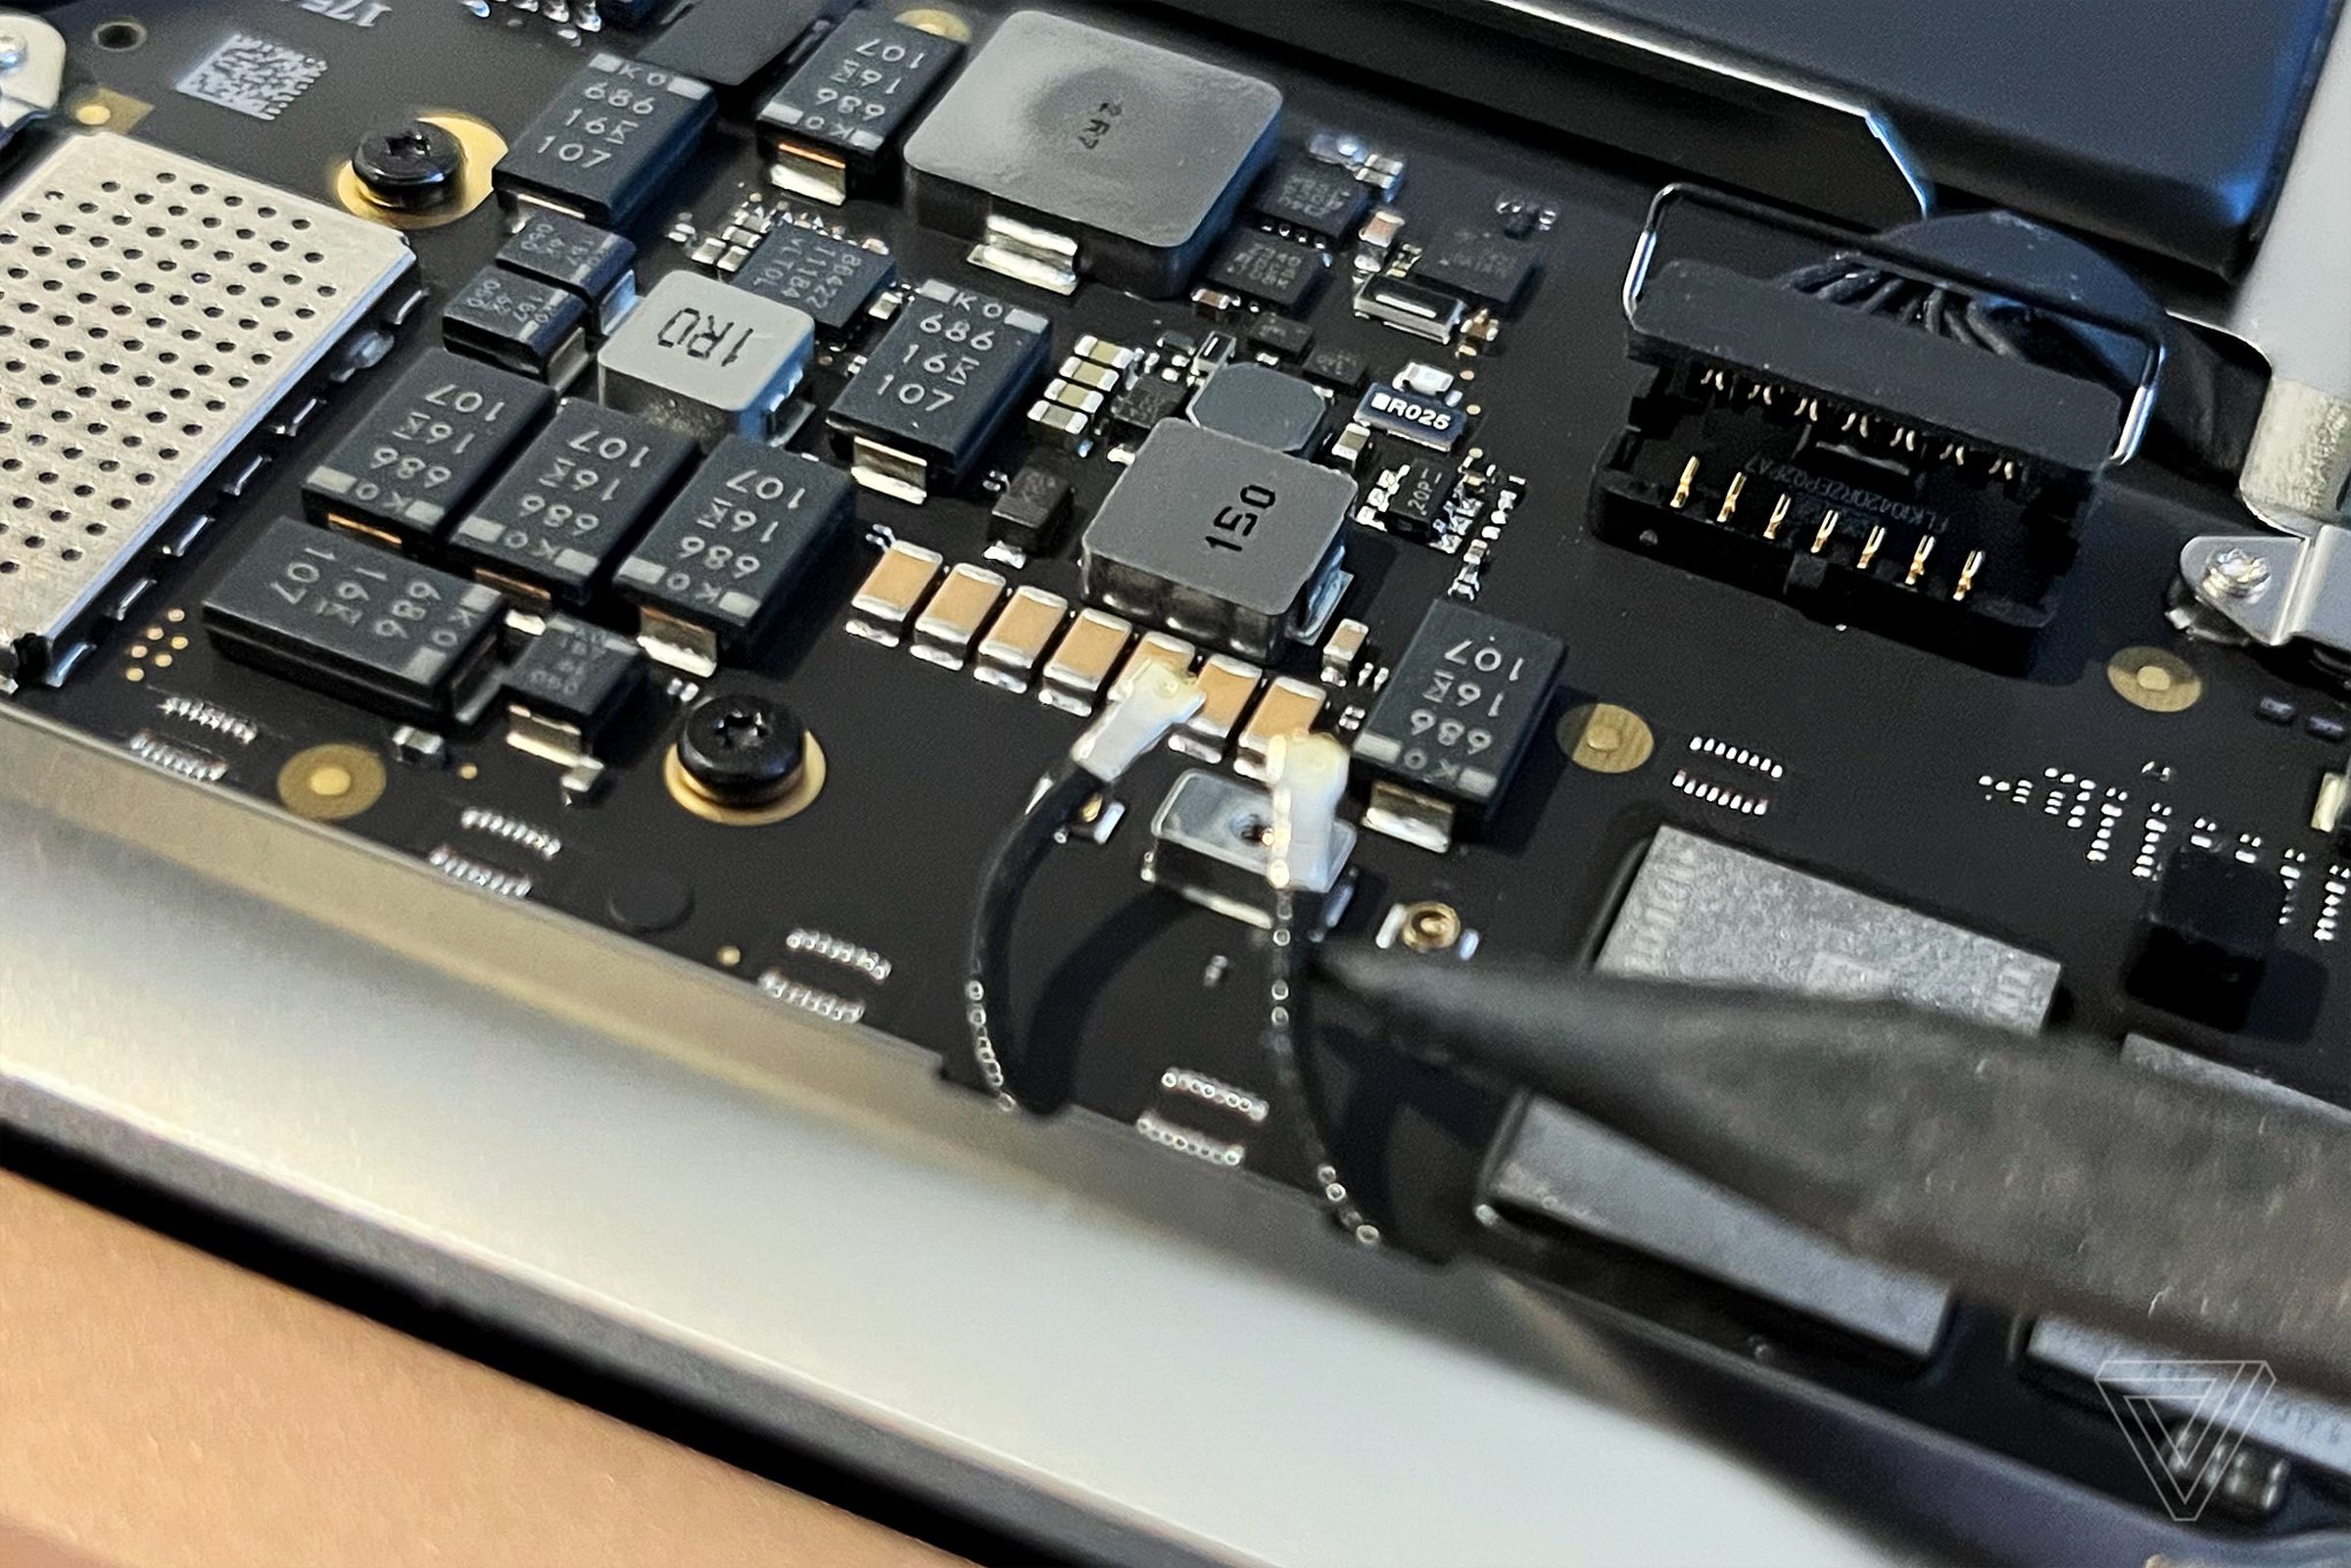 Disconnecting the antenna cables in the M1 MacBook Air. Don’t worry — these will go back when we finish up so you can keep Wi-Fi.